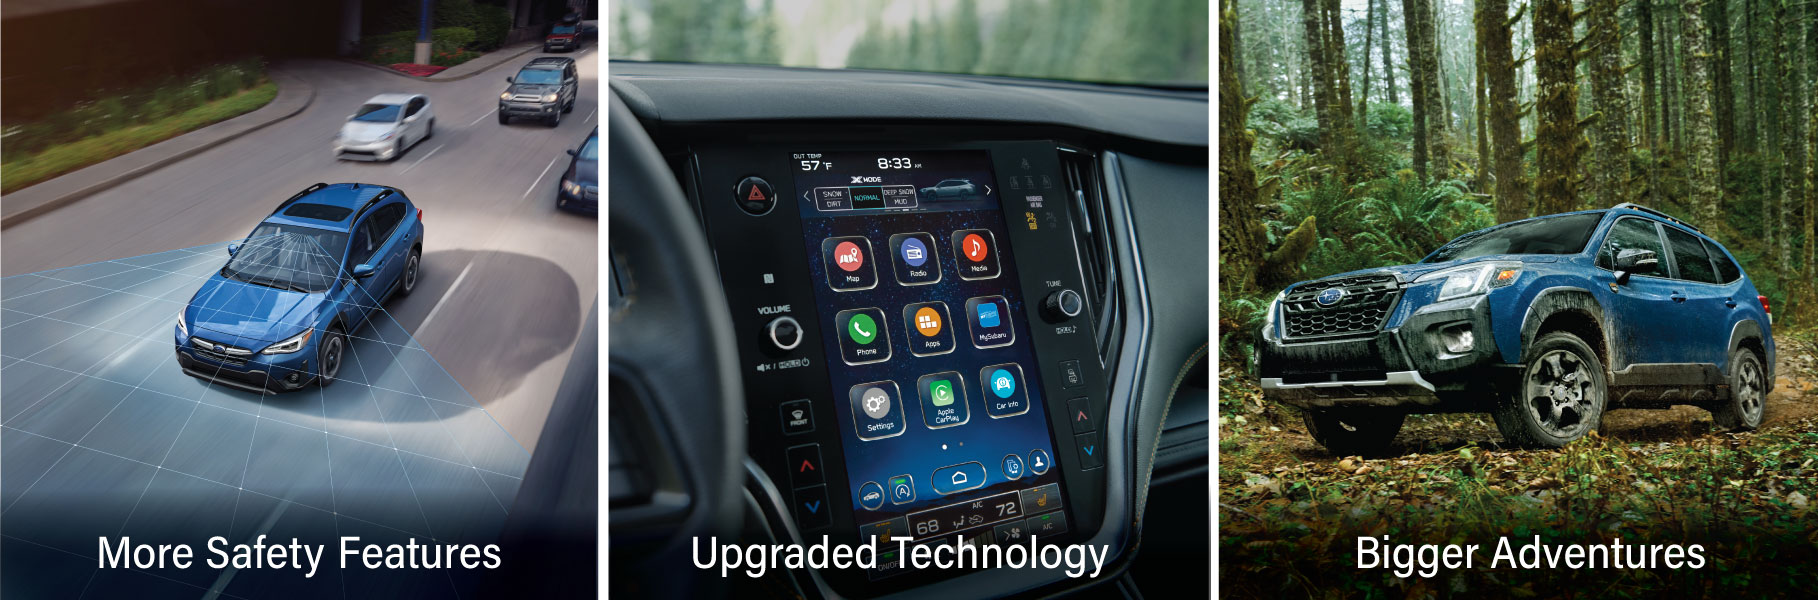 A Subaru Crosstrek in blue with the words &quotMore Safety Features". An 8-inch available touchscreen with the words &quotUpgraded Technology". A blue Subaru outback wilderness with the words &quotBigger Adventures".